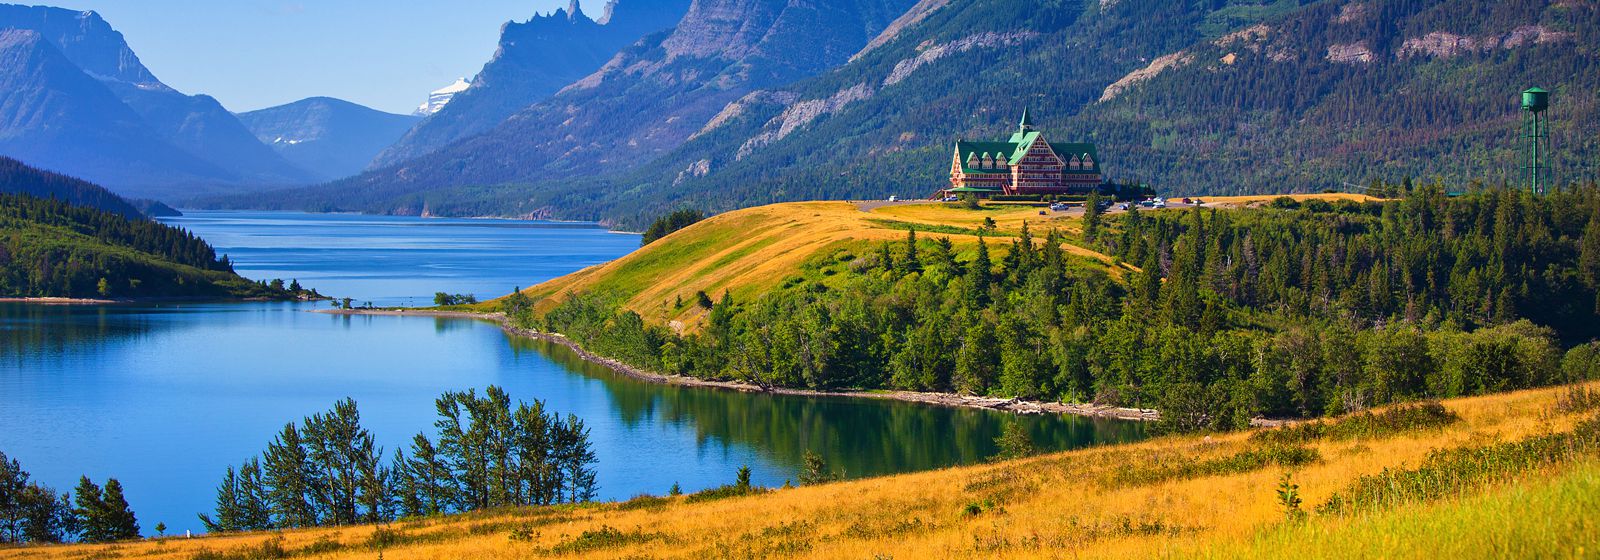 15 Beautiful Places You Have To Visit In Alberta Canada Hand Luggage Only Travel Food 1546